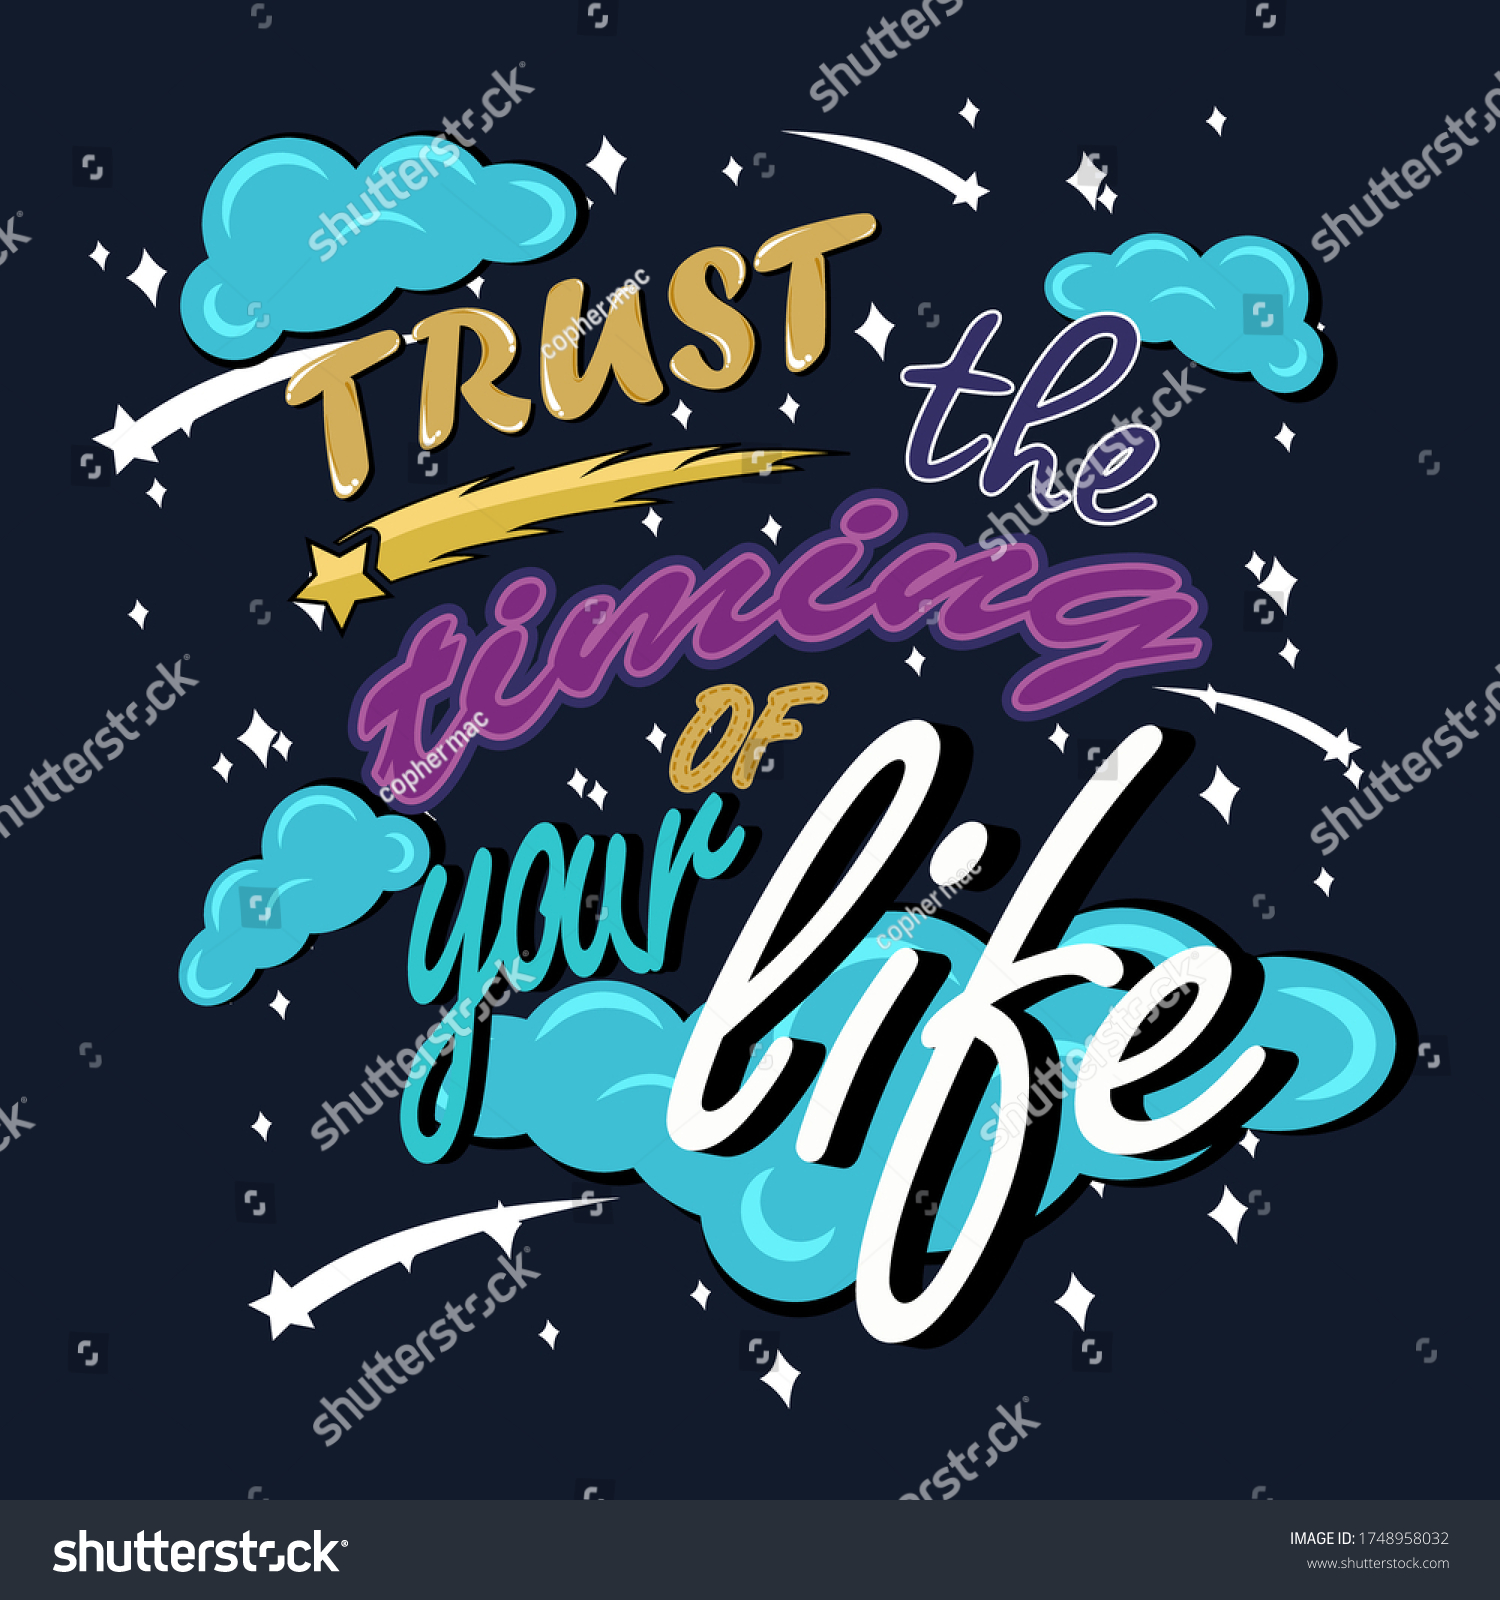 Trust Timming Your Life Typography Stock Vector (Royalty Free ...